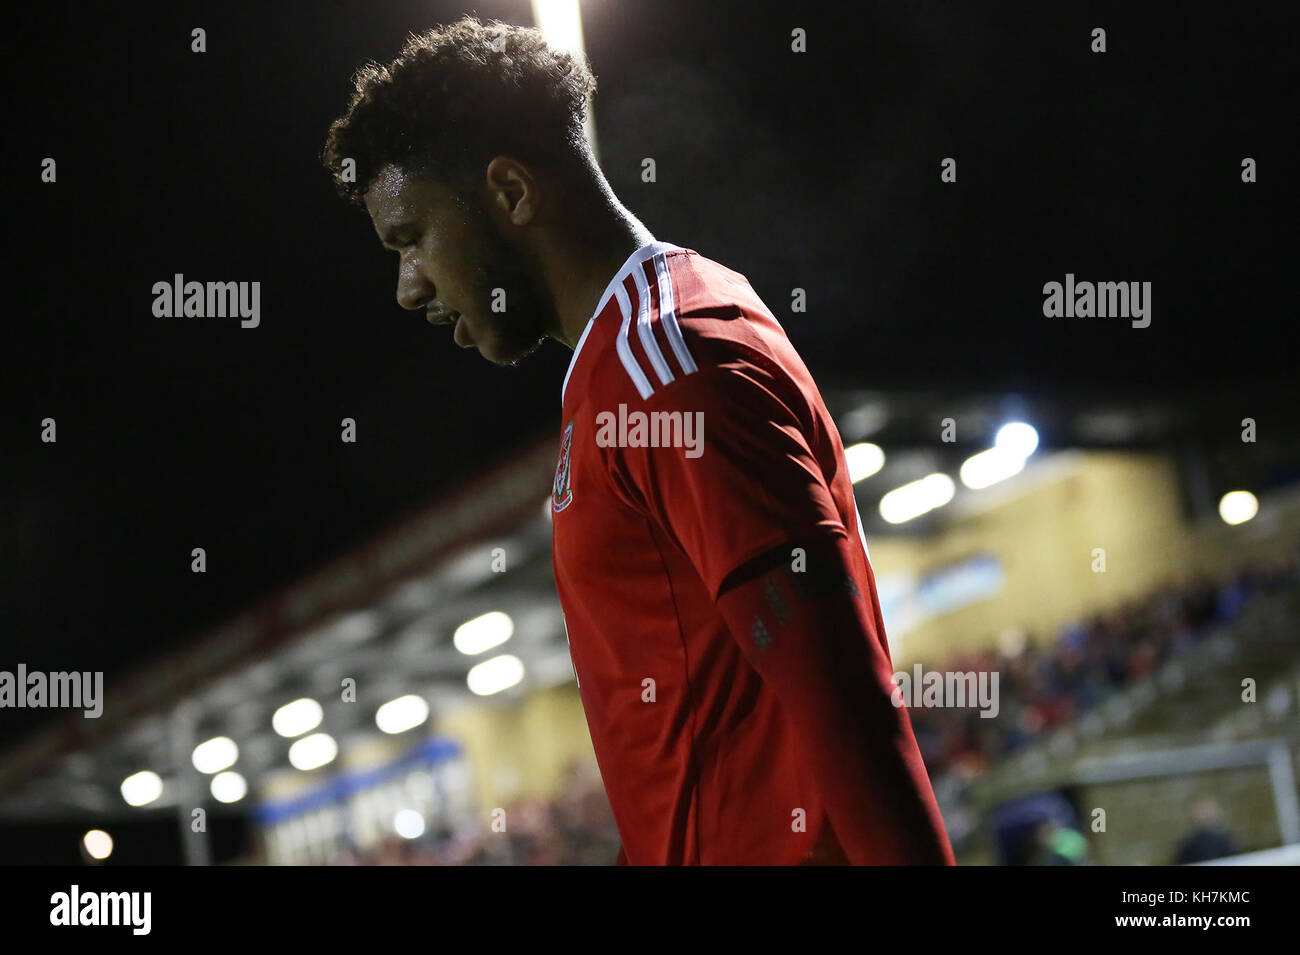 Bangor, Wales. 14th November, 2017. Tyler Roberts of West Bromwich Albion during the Wales U21 vs Romania U21 at Bangor University Stadium in the group 8 qualification match for UEFA Euro U21 in 2019. Credit: Dafydd Owen/Alamy Live News Stock Photo